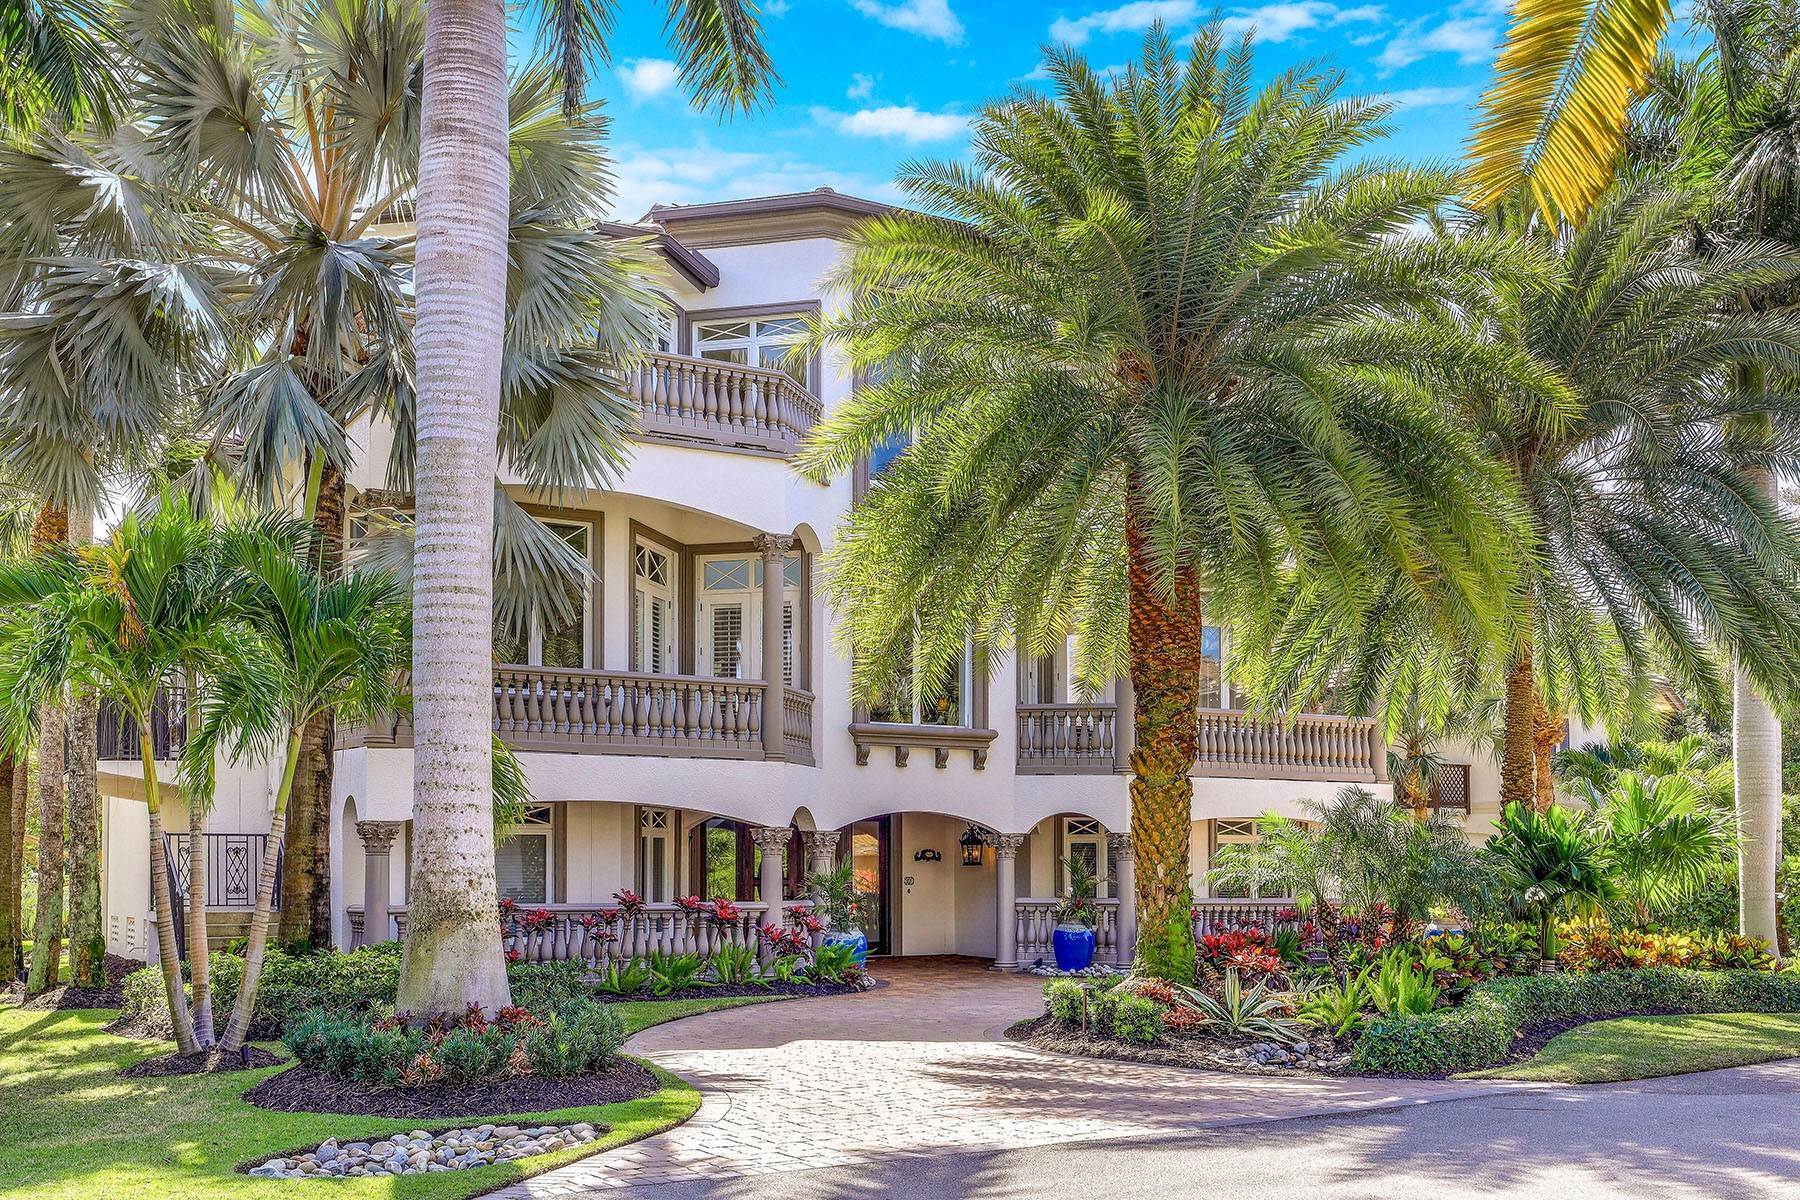 Single Family Homes for Sale at MARCO ISLAND - HIDEAWAY BEACH 201 S Beach Drive Marco Island, Florida 34145 United States